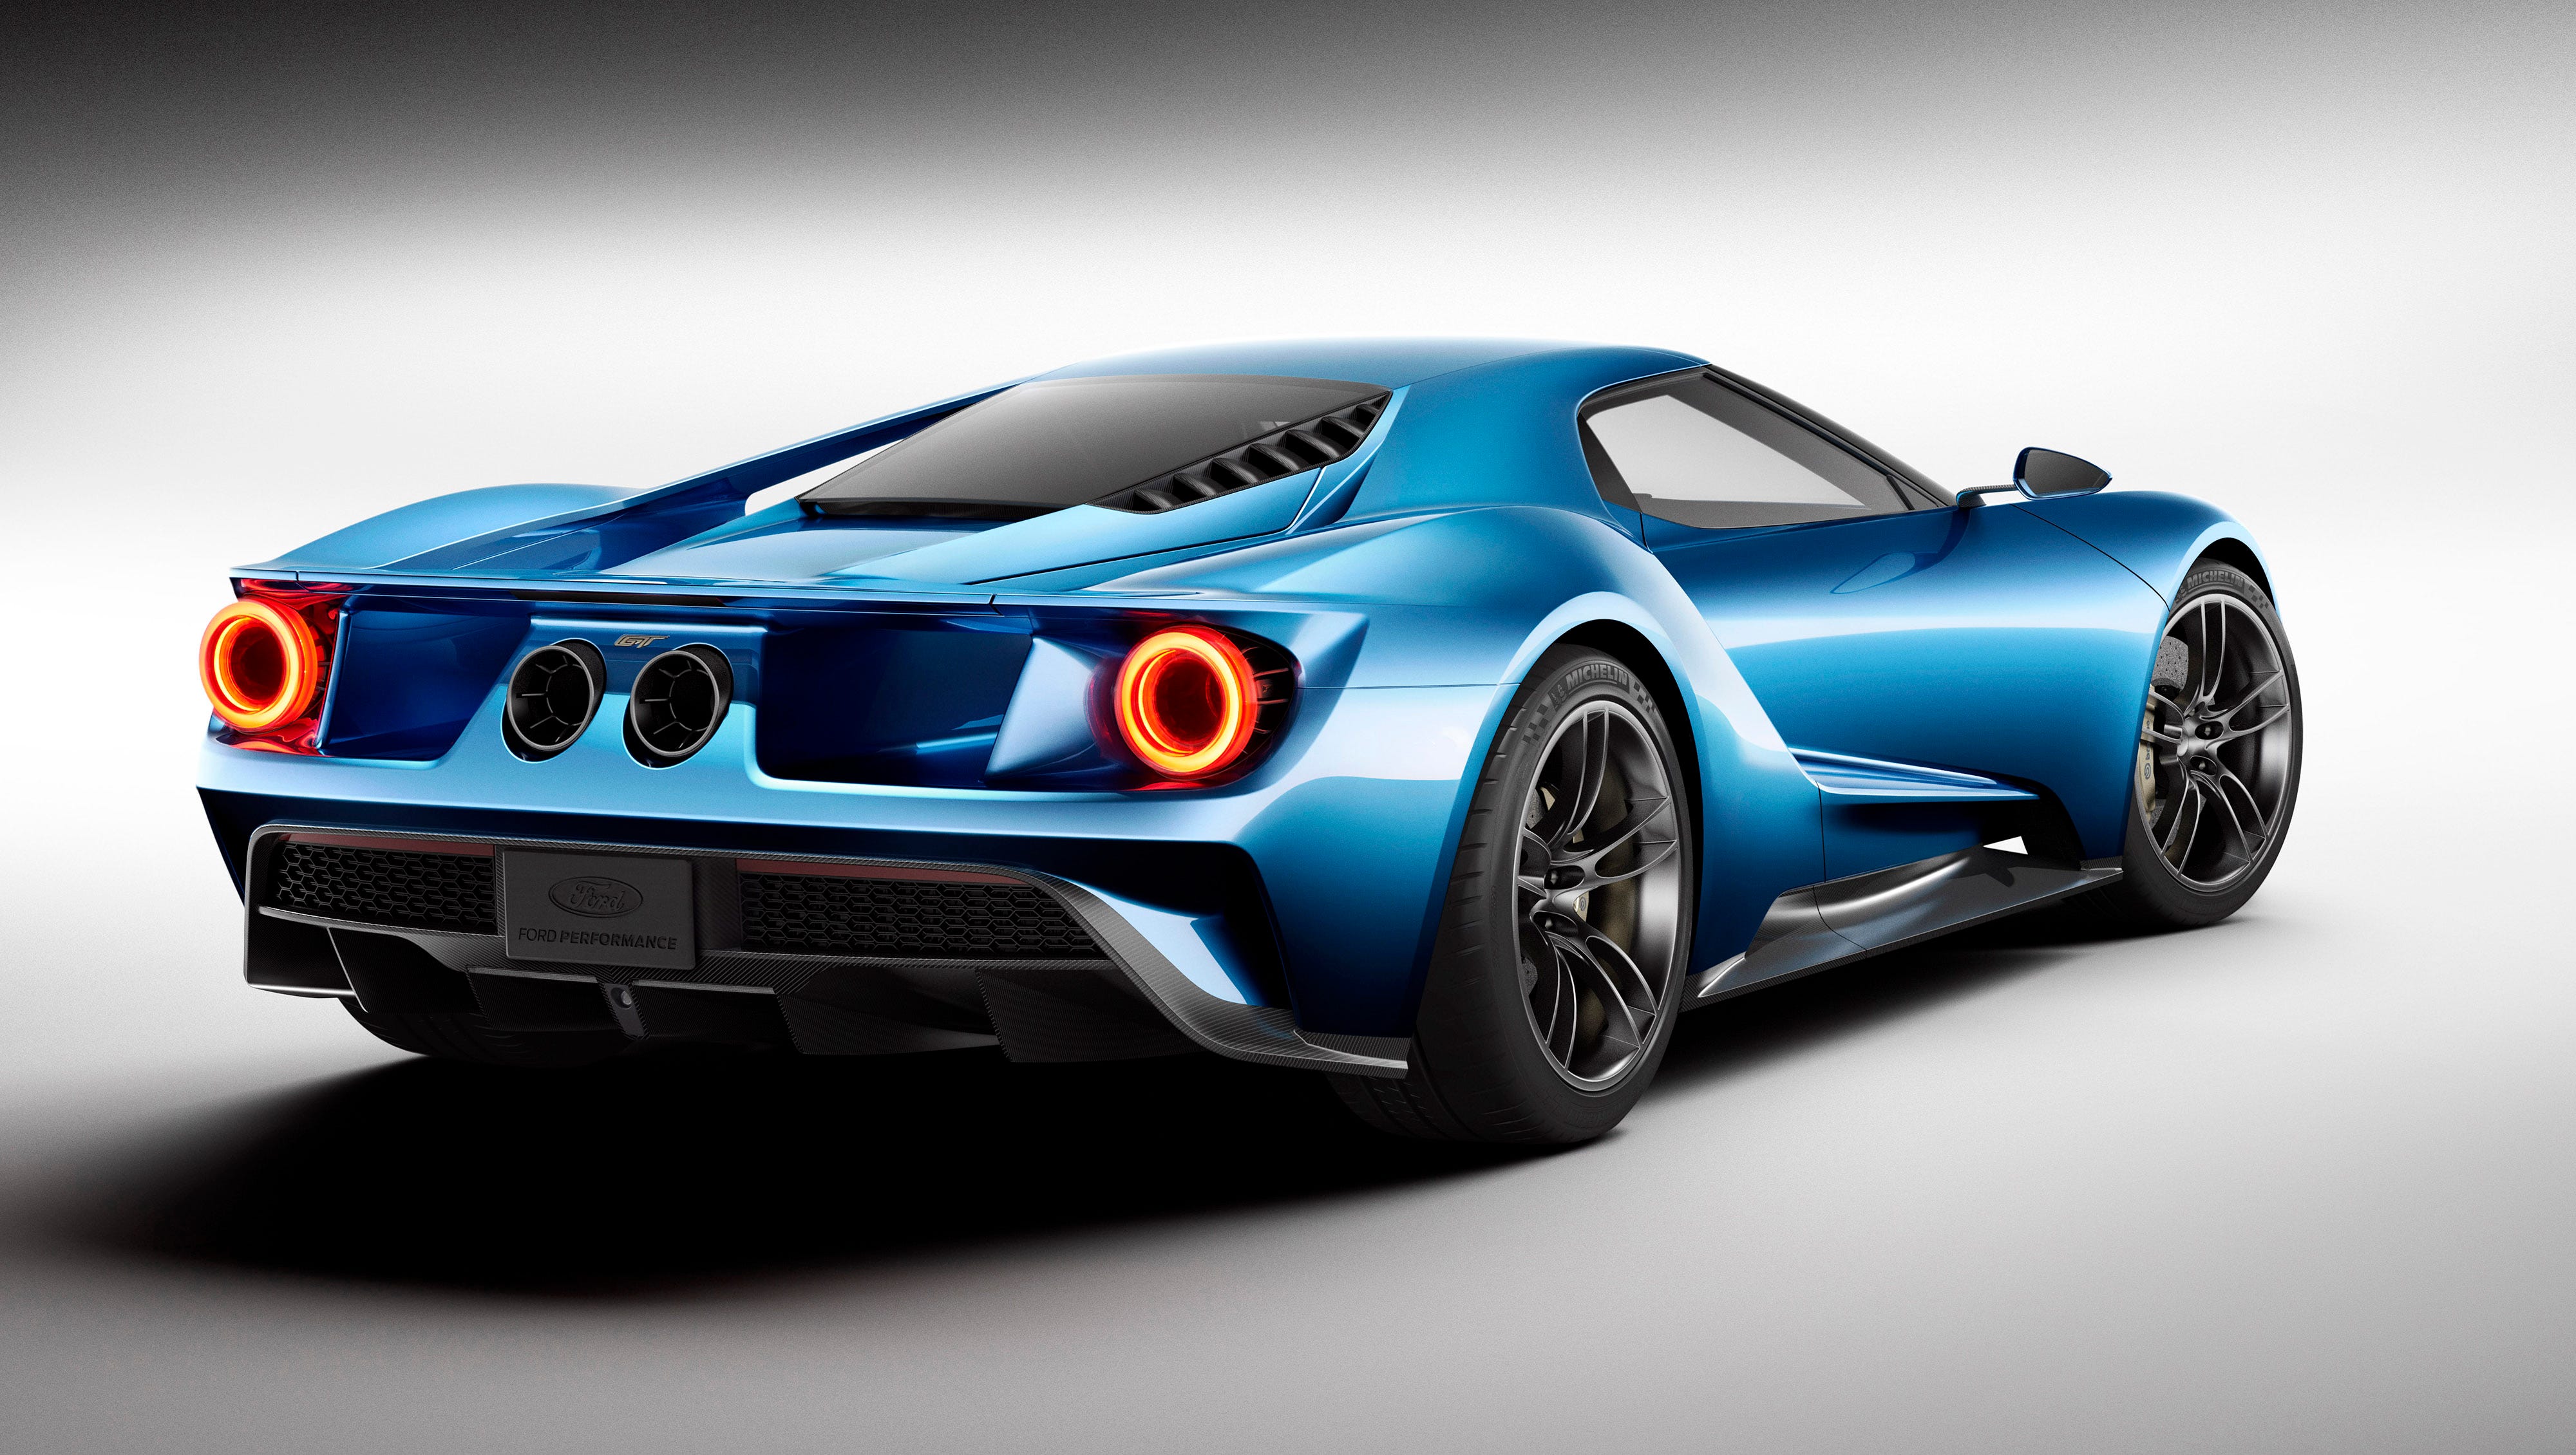 The all-new carbon-fiber Ford GT supercar features rear-wheel drive, a mid-mounted engine, and a sleek, aerodynamic, two-door coupe body shell.